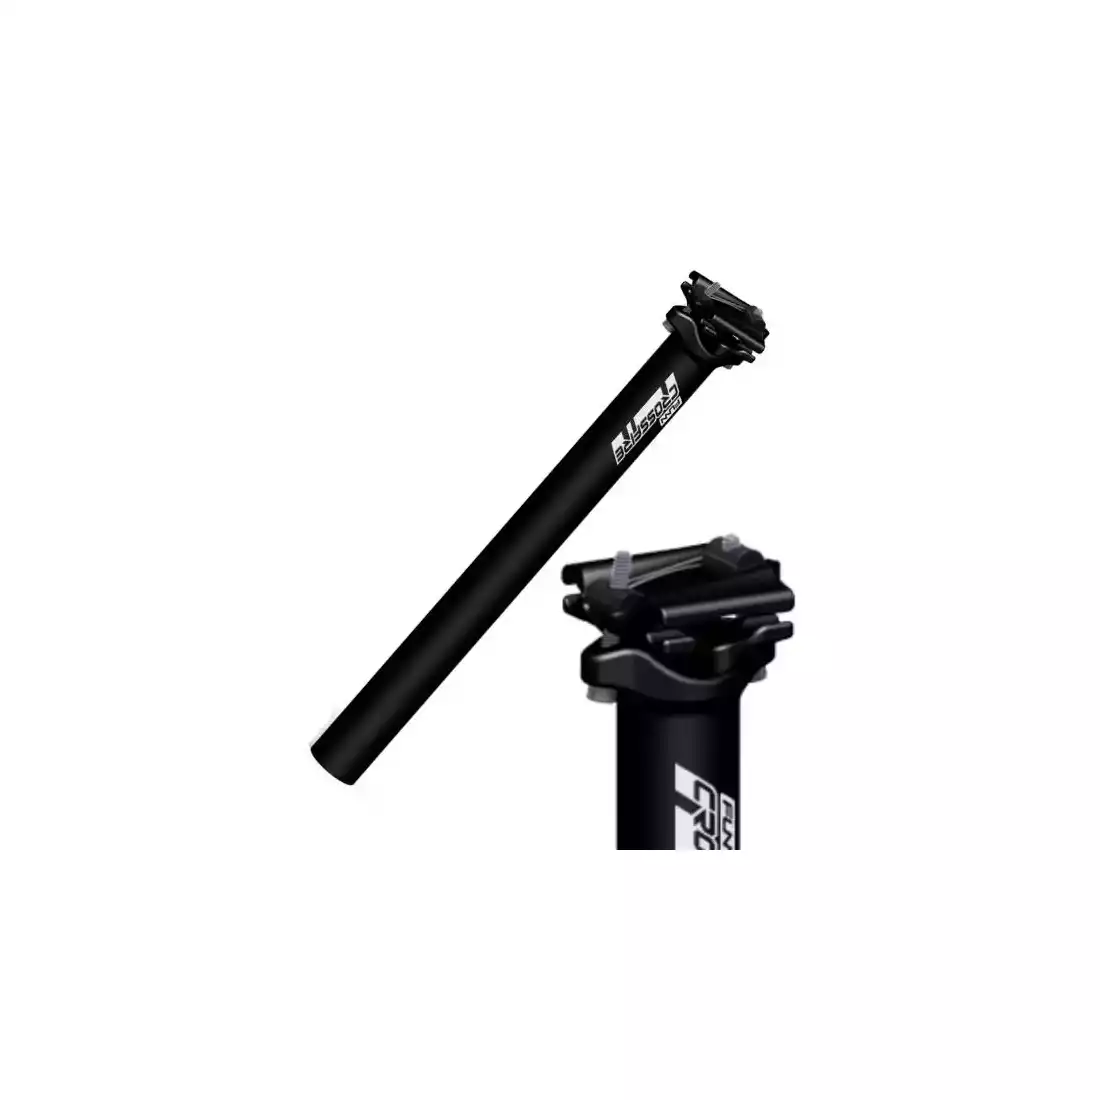 FUNN CROSSFIRE bicycle seat post 31,6 mm, black